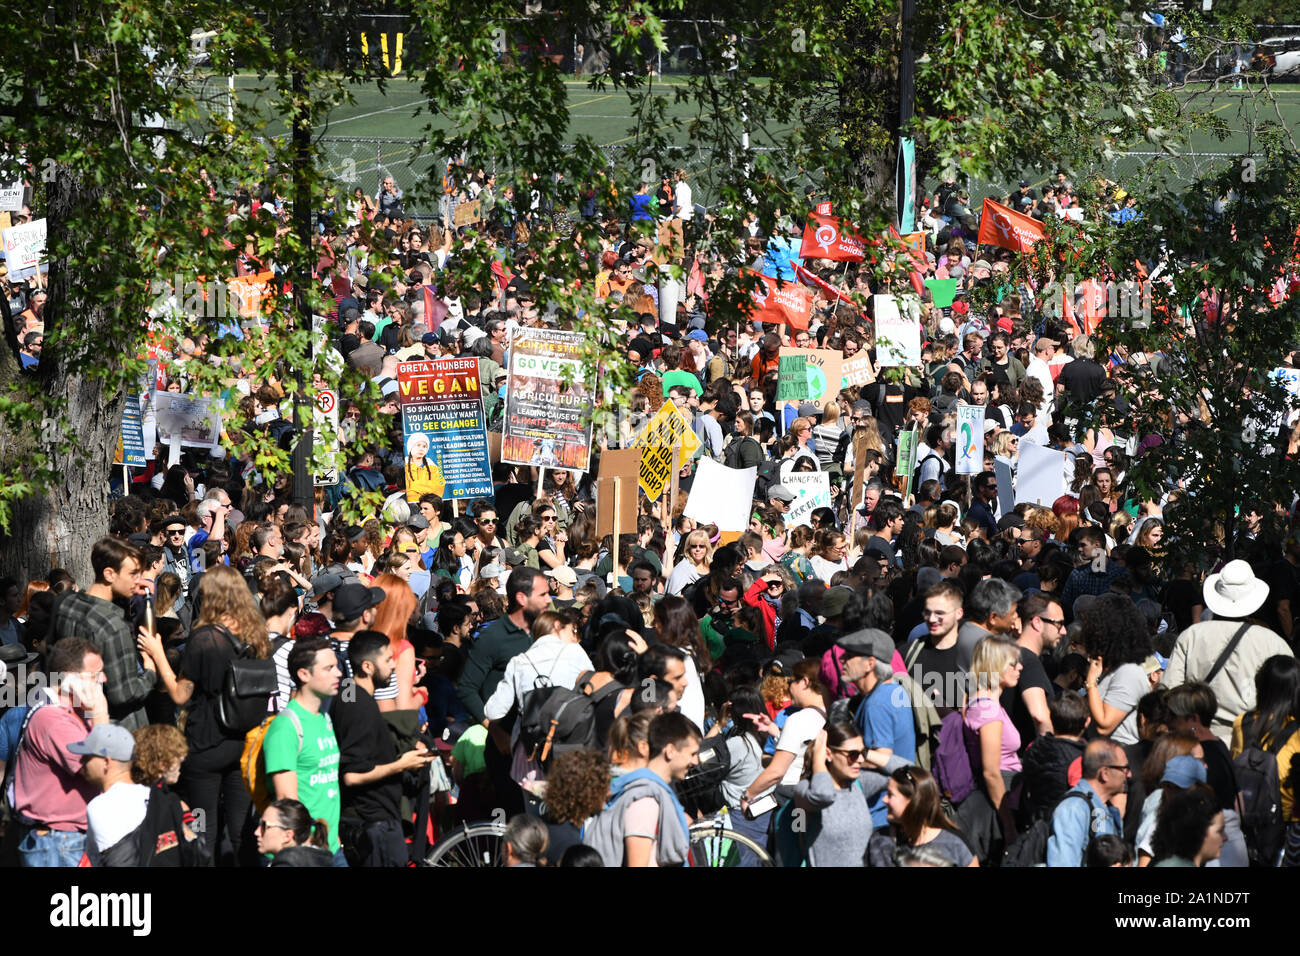 In Montreal Canada, half a million people joined the Global Climate Strike on September 27, 2019. They demanded more concrete actions from authorities to counter global warming and climate change. Stock Photo